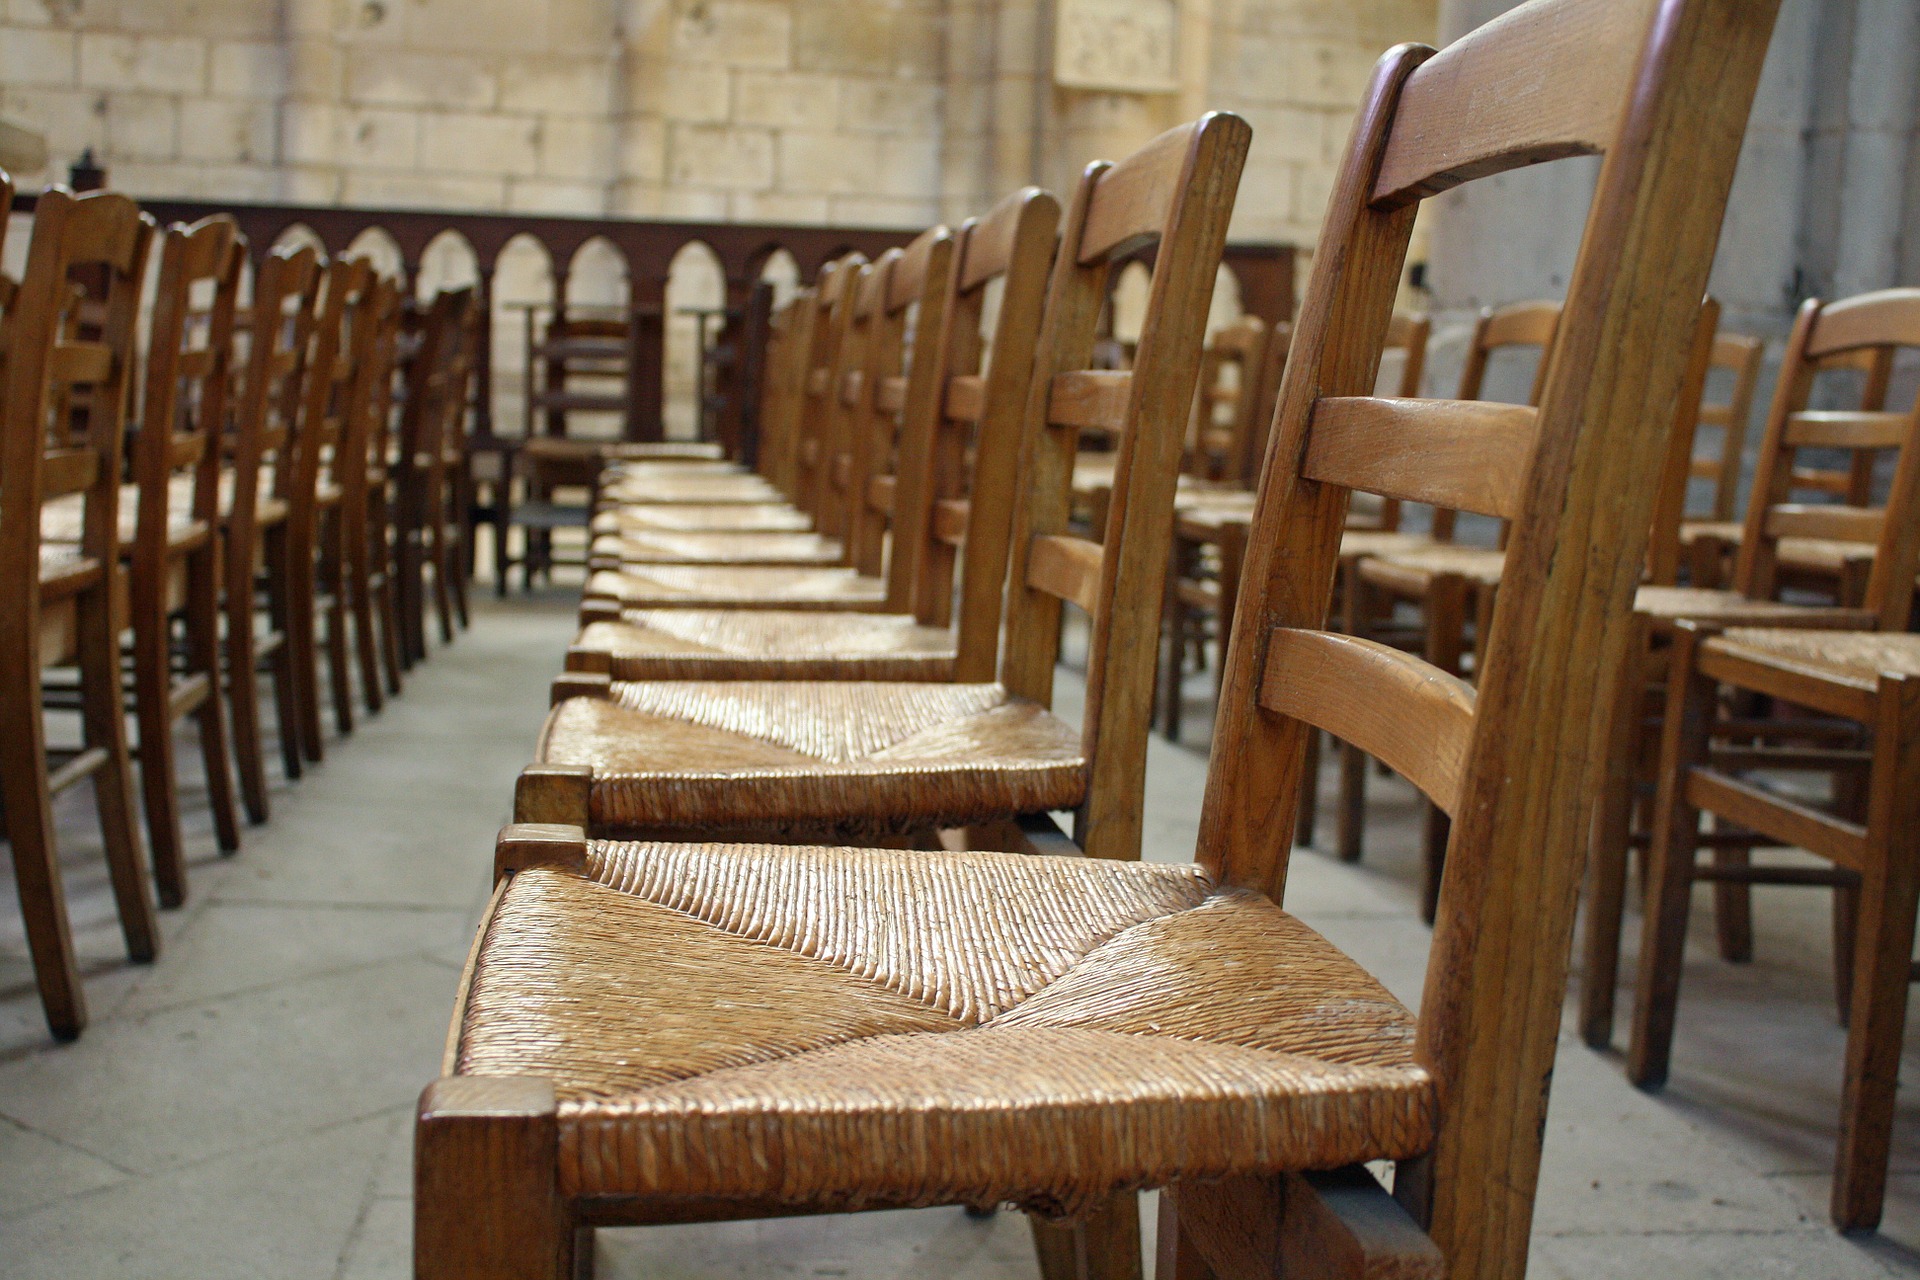 Photo of a row of empty wooden chairs